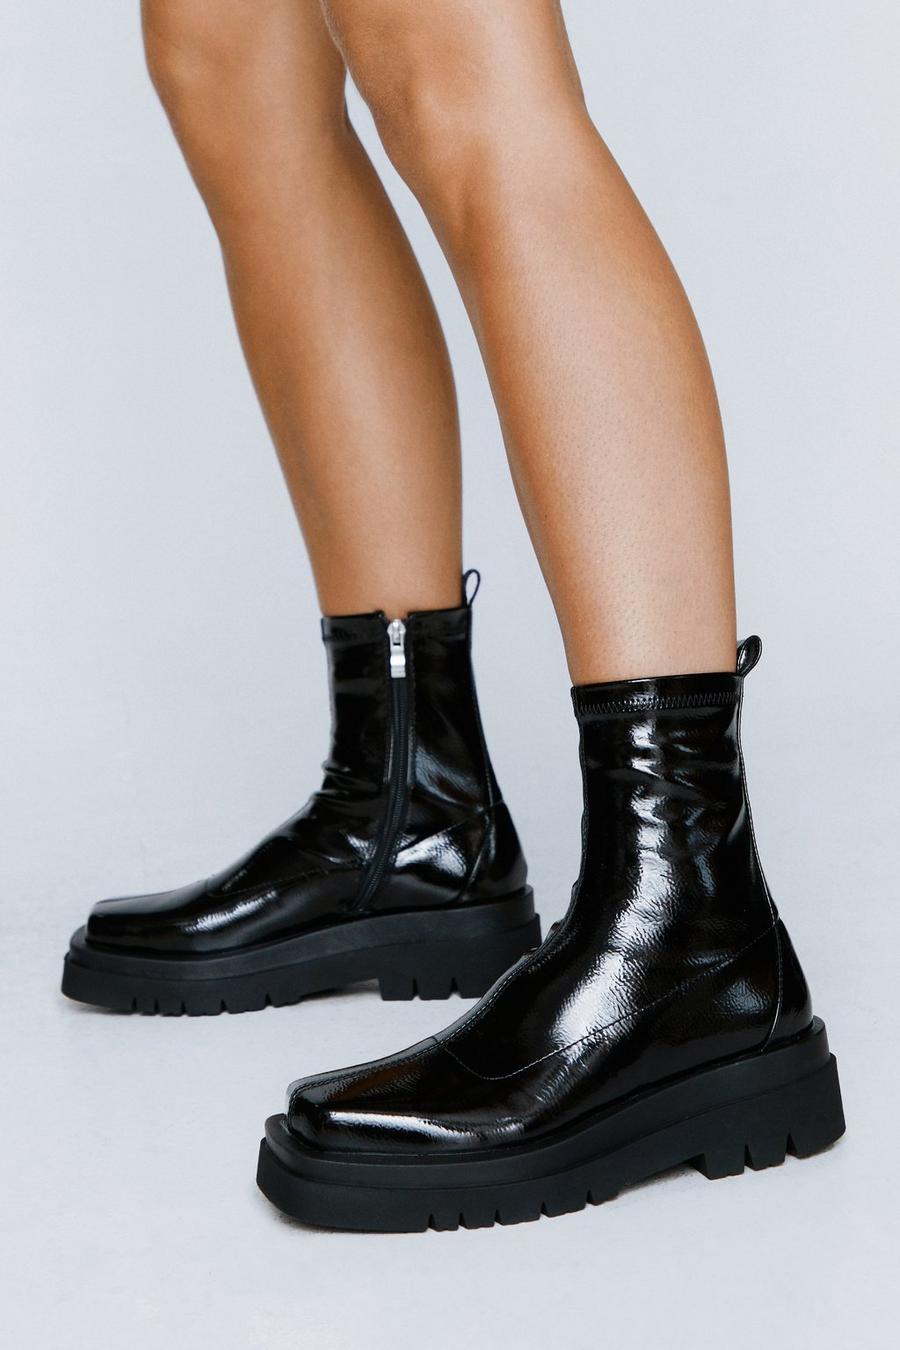 Patent Square Toe Ankle Sock Boots